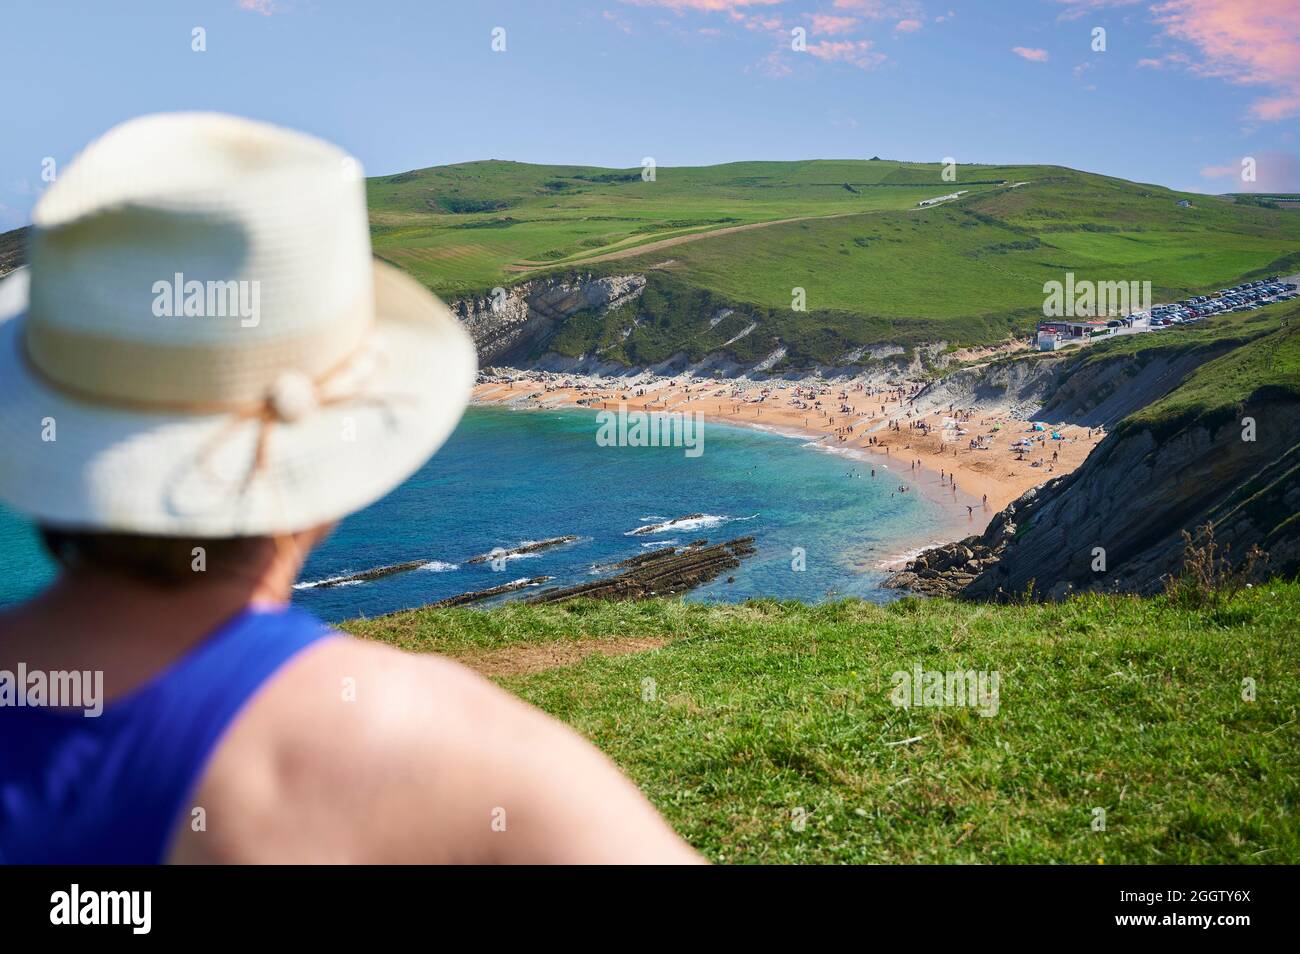 Blur of middle-aged woman with straw hat in foreground in front of Sable de Tagle beach,Suances, Cantabria, Spain, Europe Stock Photo